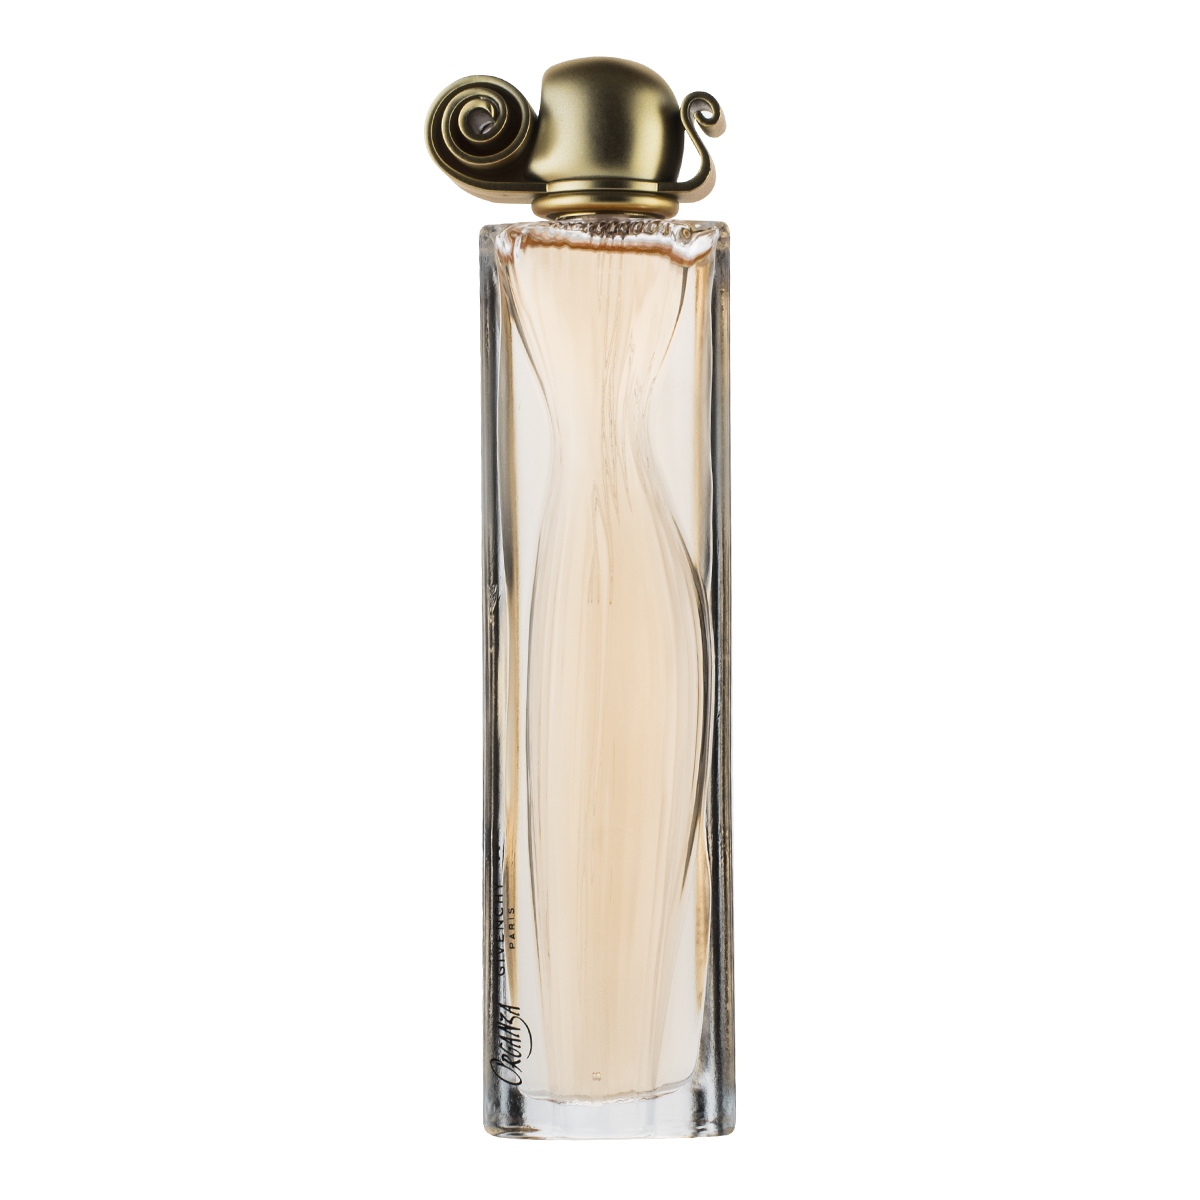 Order for € from Beautybuys Ireland - Just like the sheer fabric, Givenchy  Organza Eau De Parfum flows over the skin elegantly and effortlessly with  fresh, floral and spicy notes. The timeless